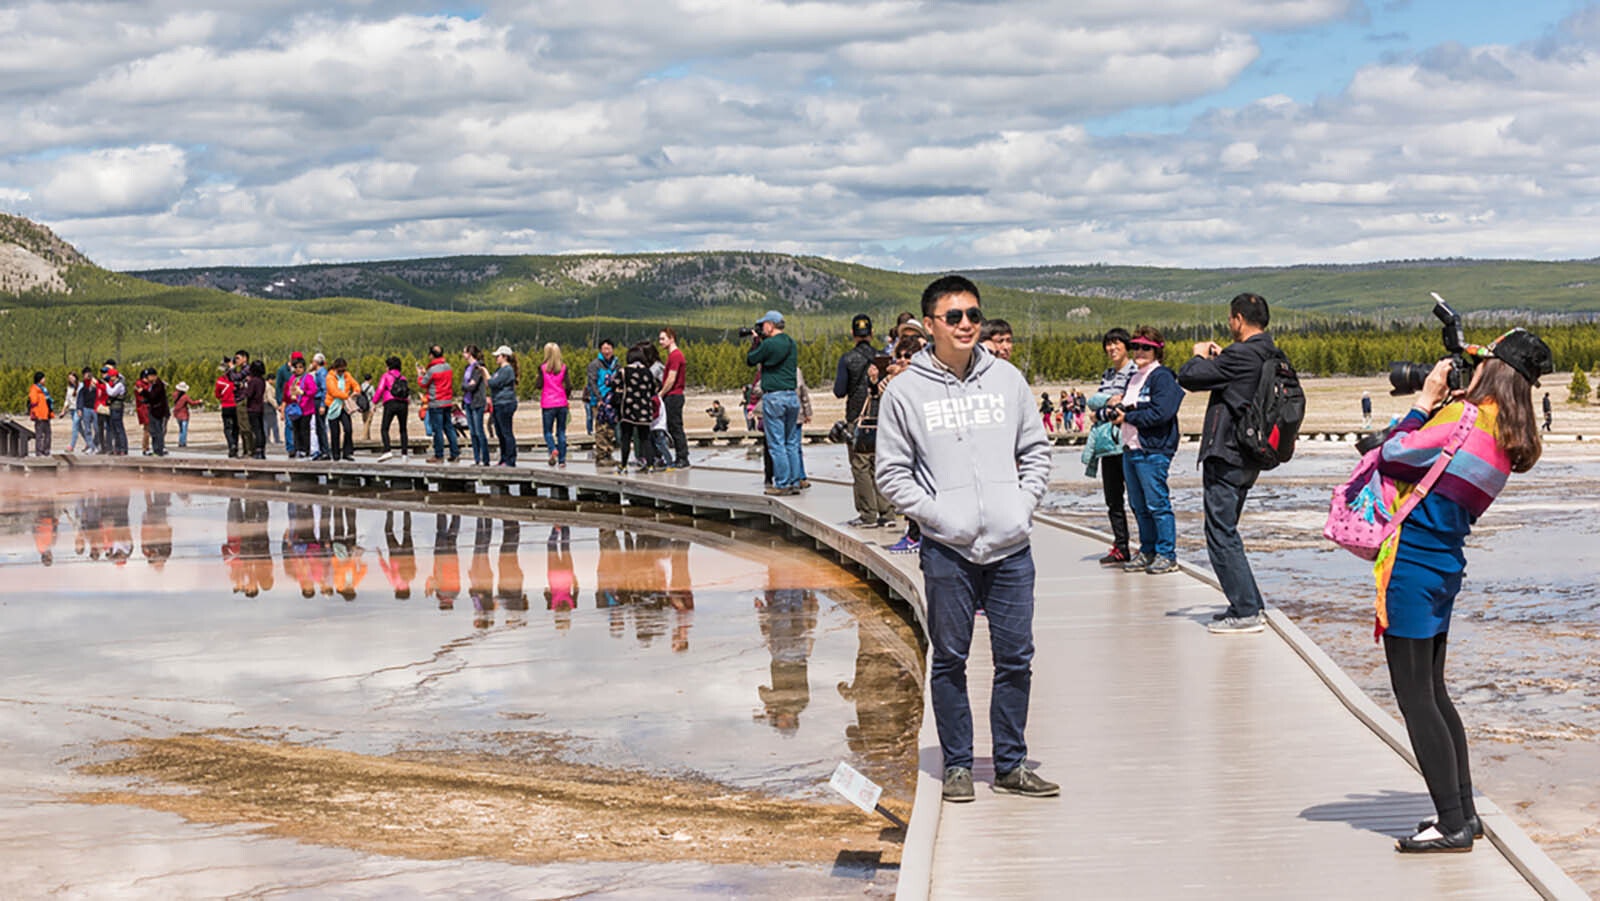 A visit to Yellowstone National Park is a bucket-list item for Chinese tourists visiting the United States for the first time. Many don't know about Wyoming, but they know Yellowstone.